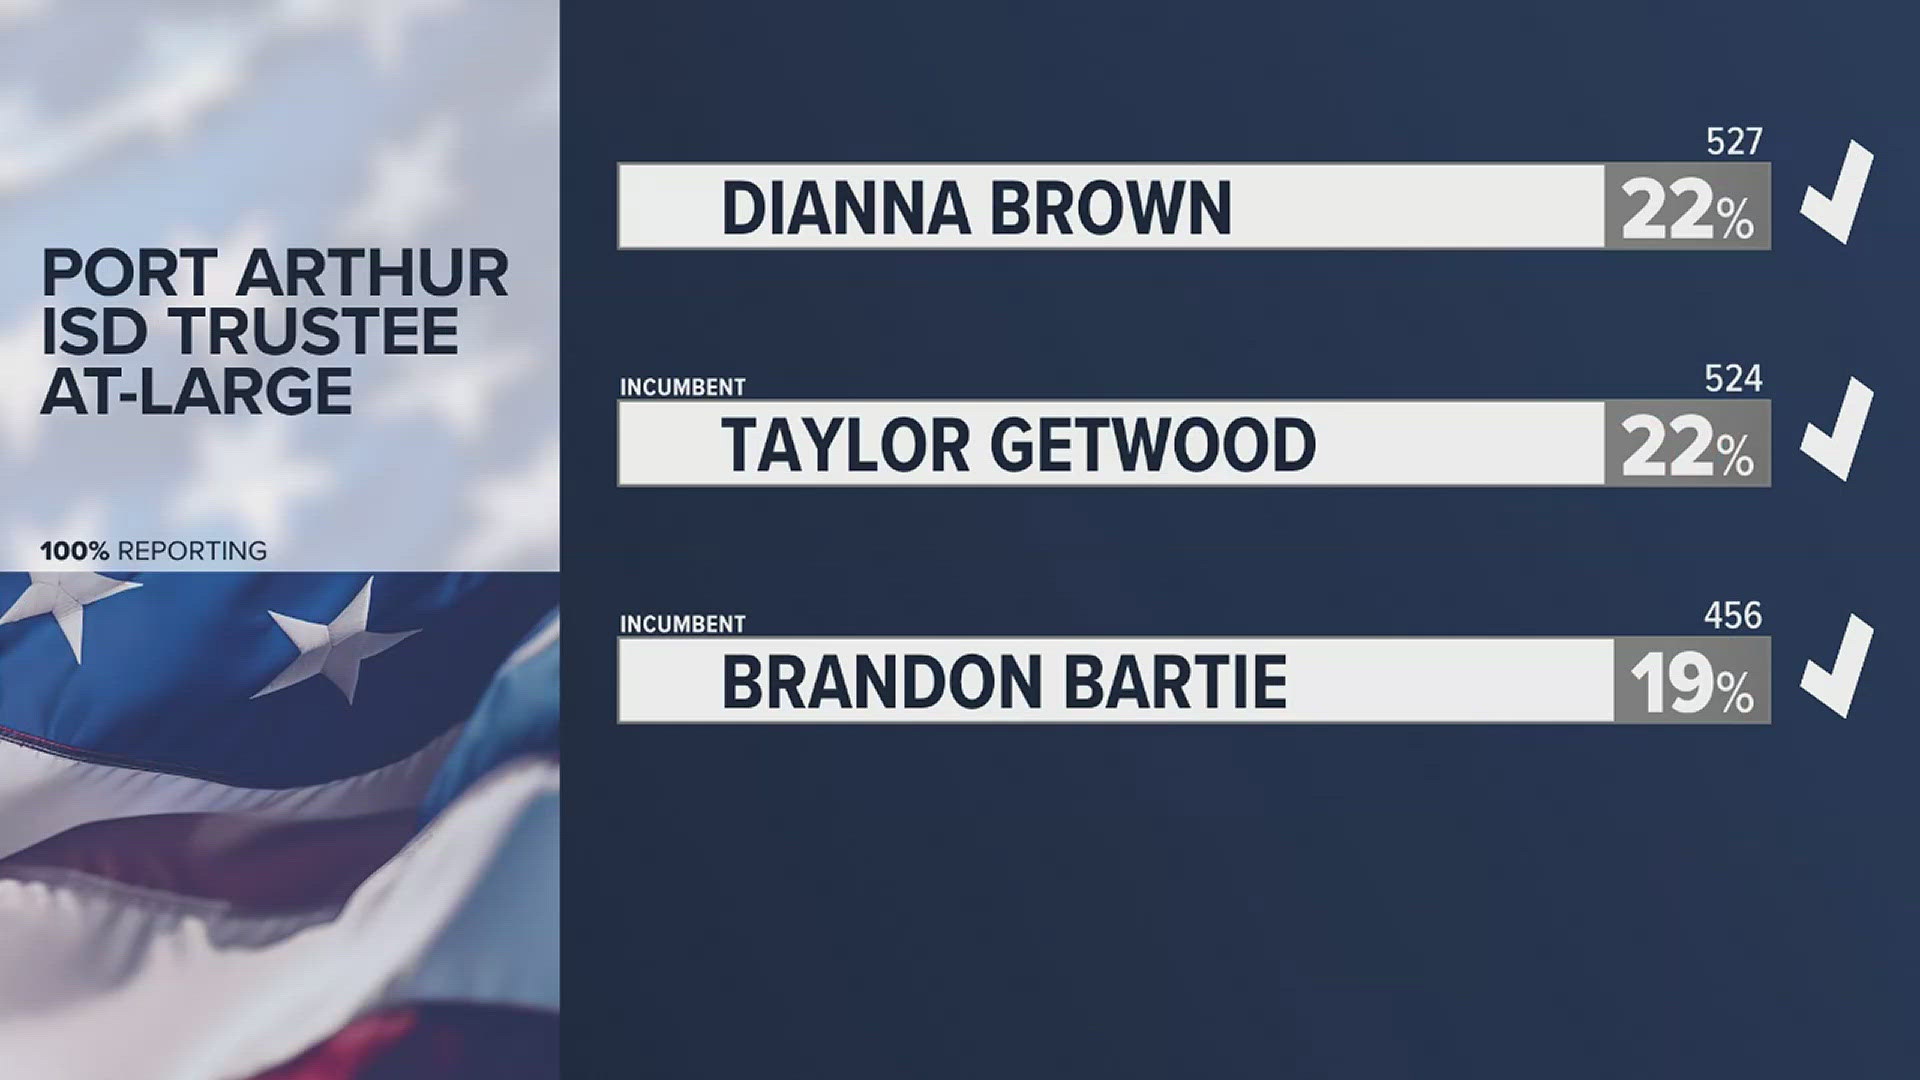 Dianna Brown joins incumbents Taylor Getwood and Brandon Bartie